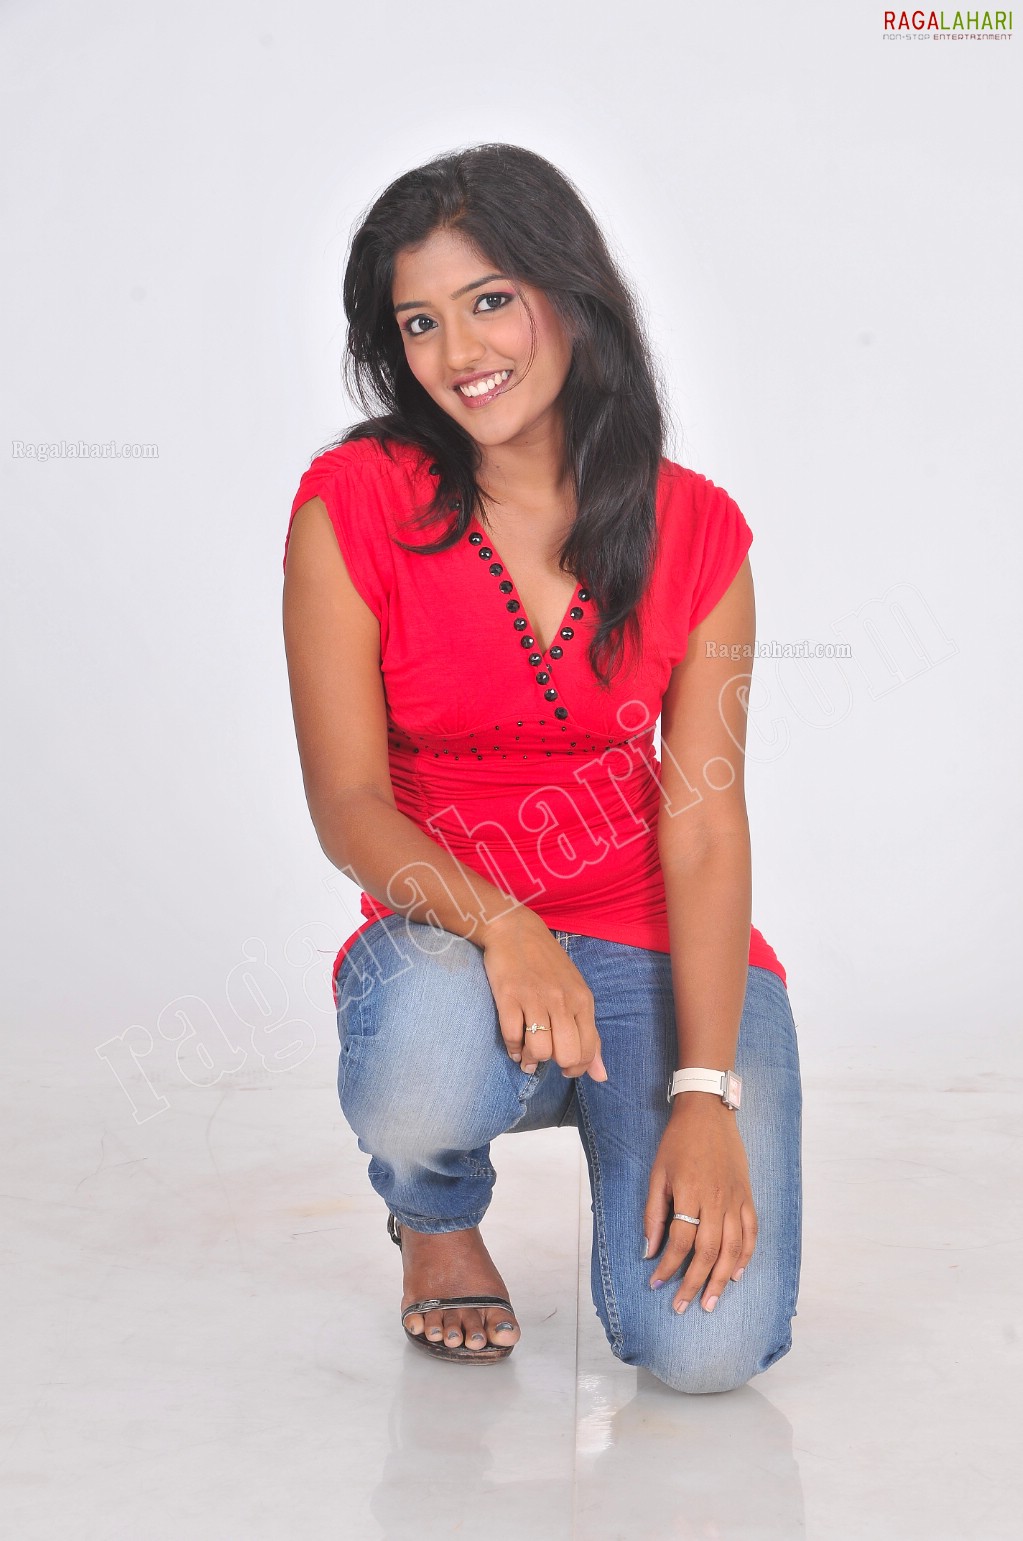 Eesha Rebba in Tomato Red Top and Jeans Exclusive Photo Shoot